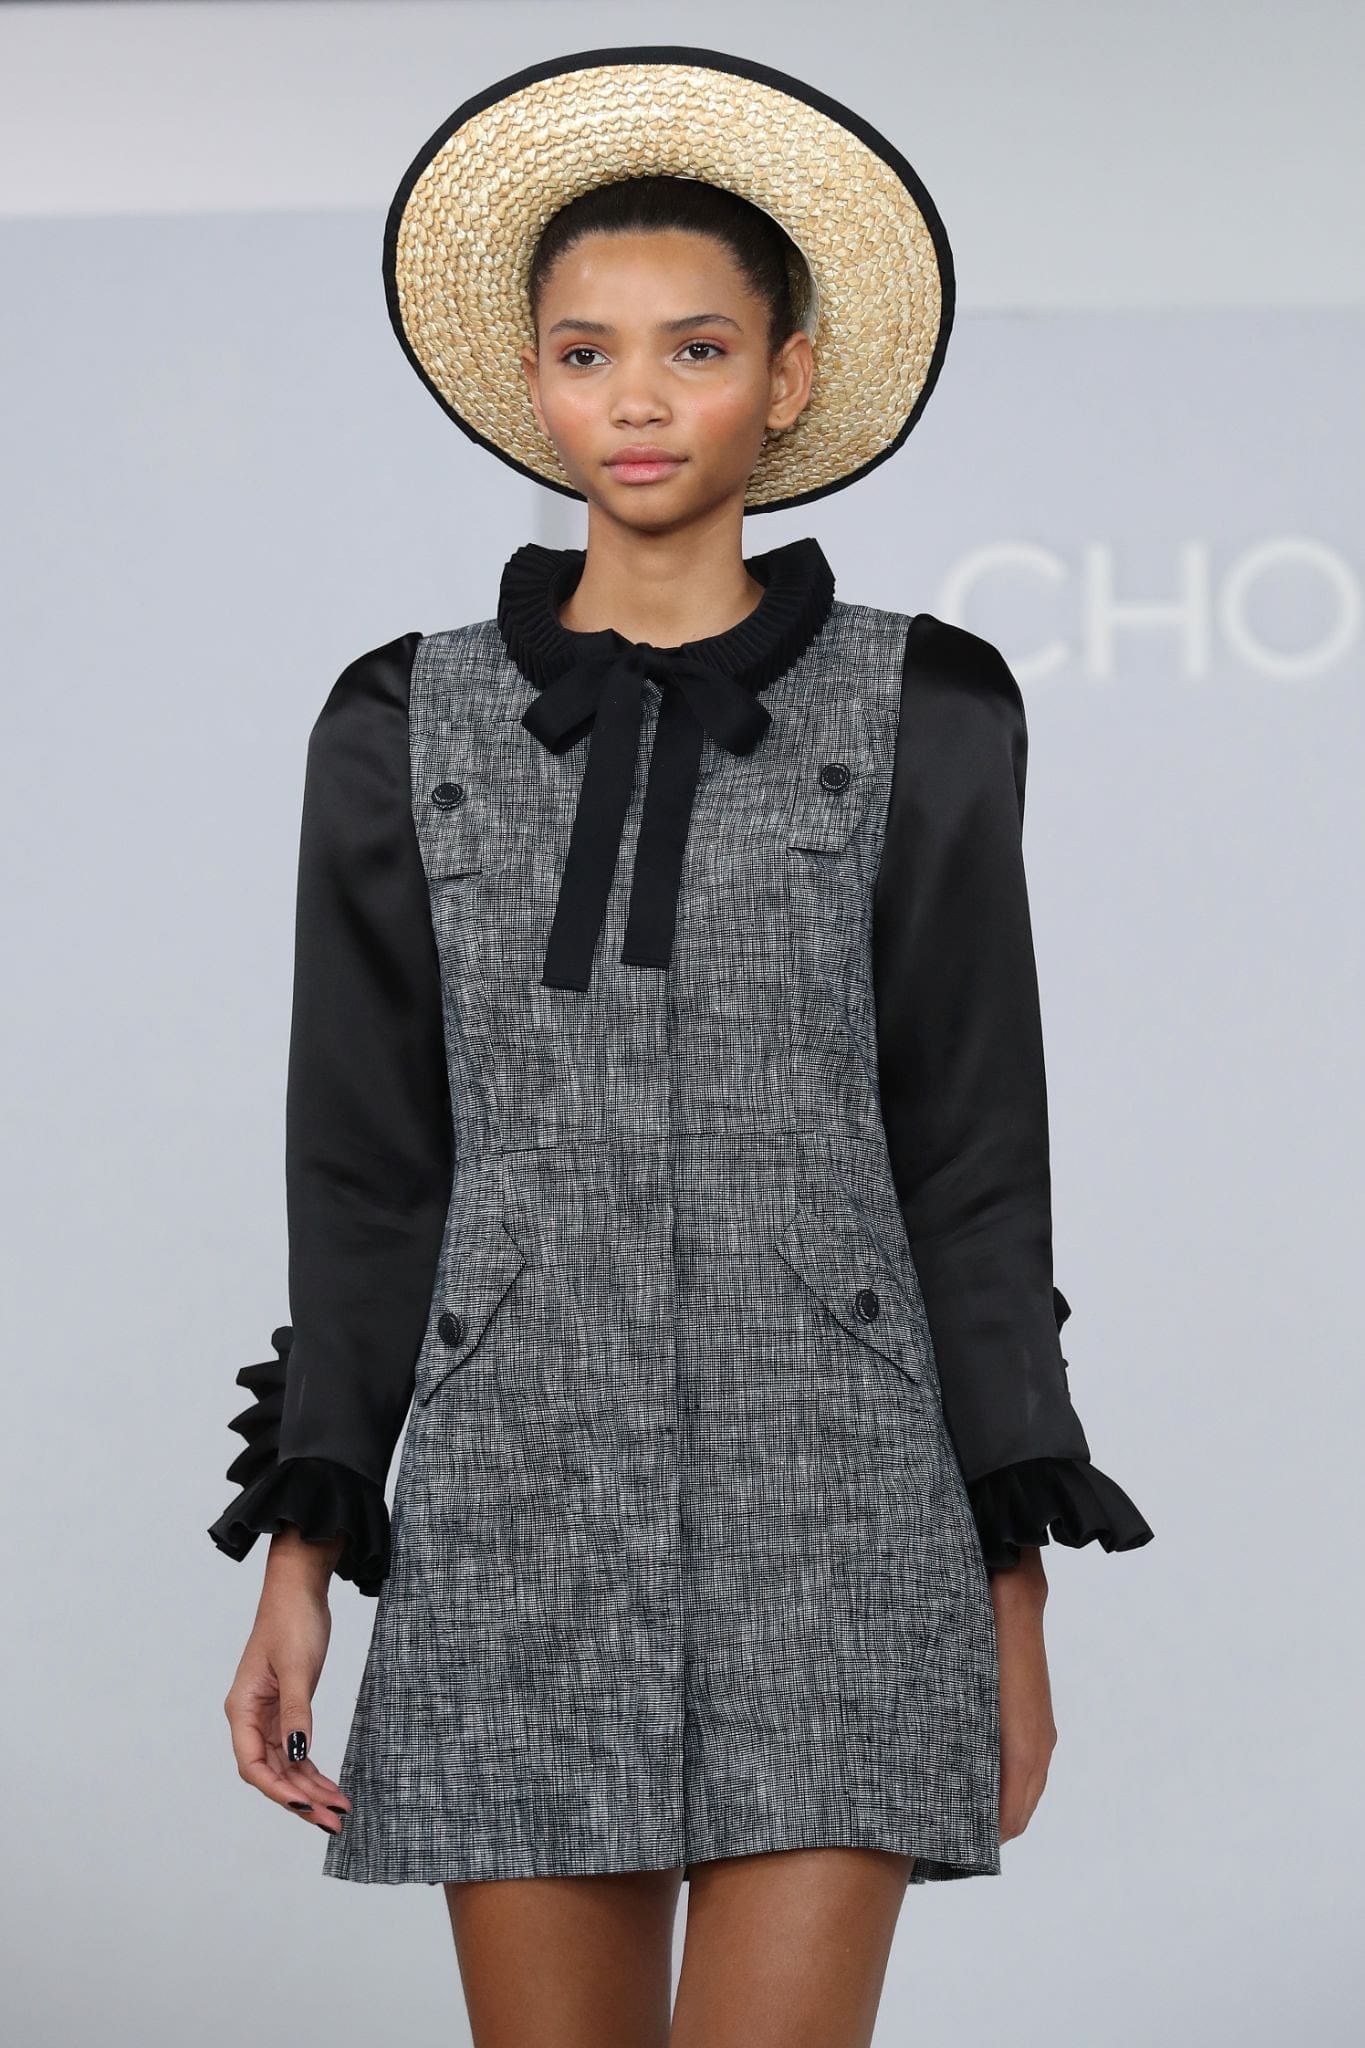 A model walks the runway in a wide-brimmed straw hat with black trim during New York Fashion Week in New York City